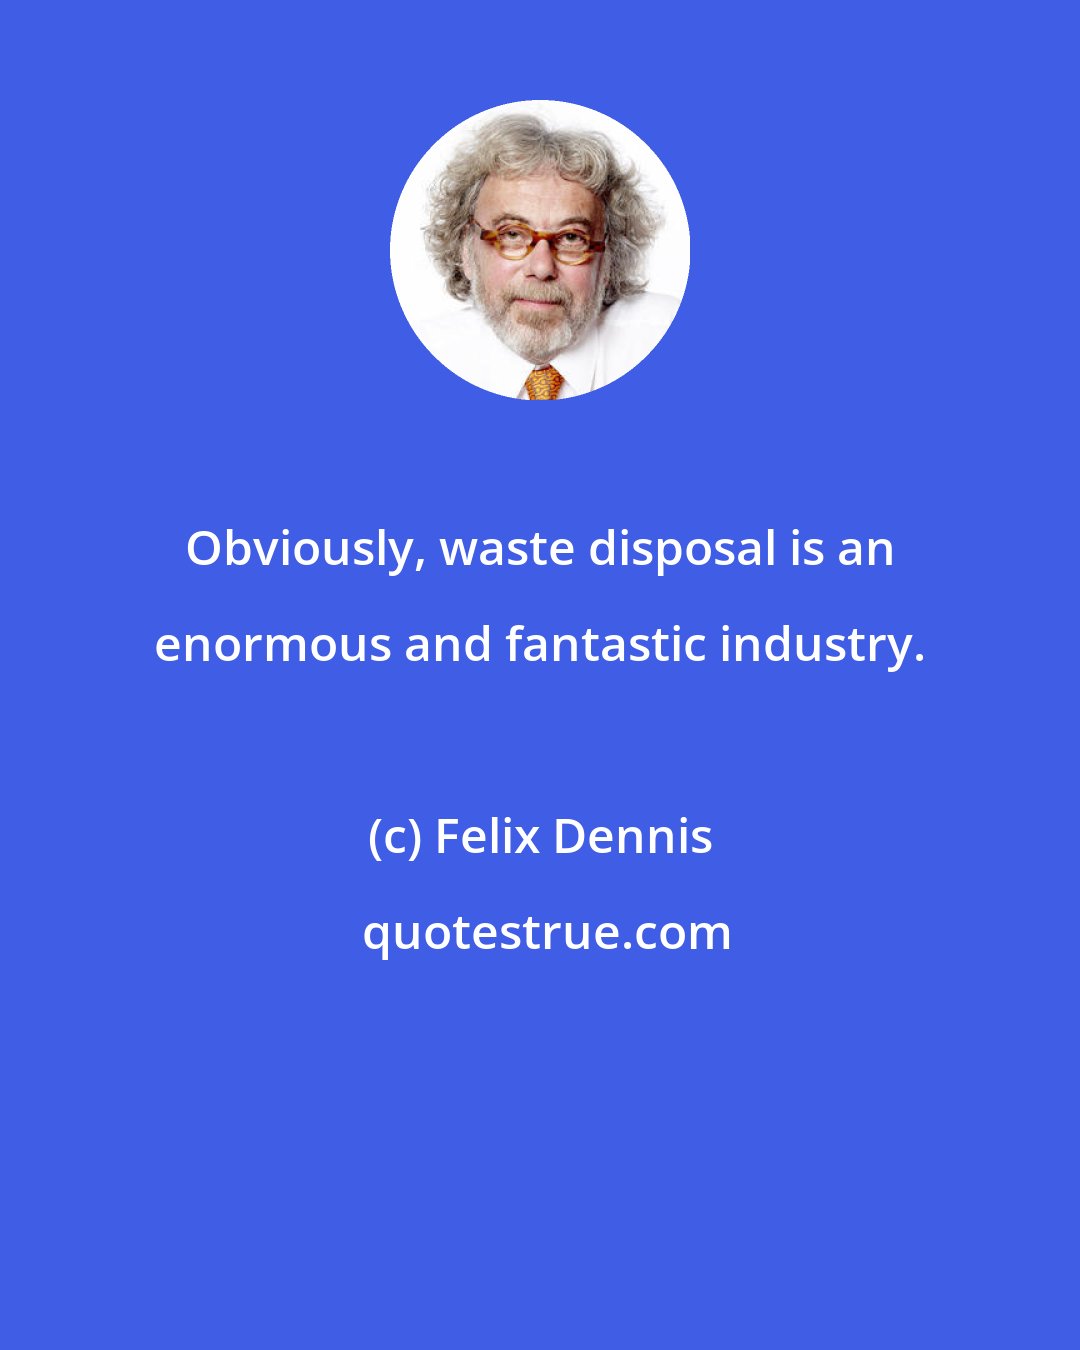 Felix Dennis: Obviously, waste disposal is an enormous and fantastic industry.